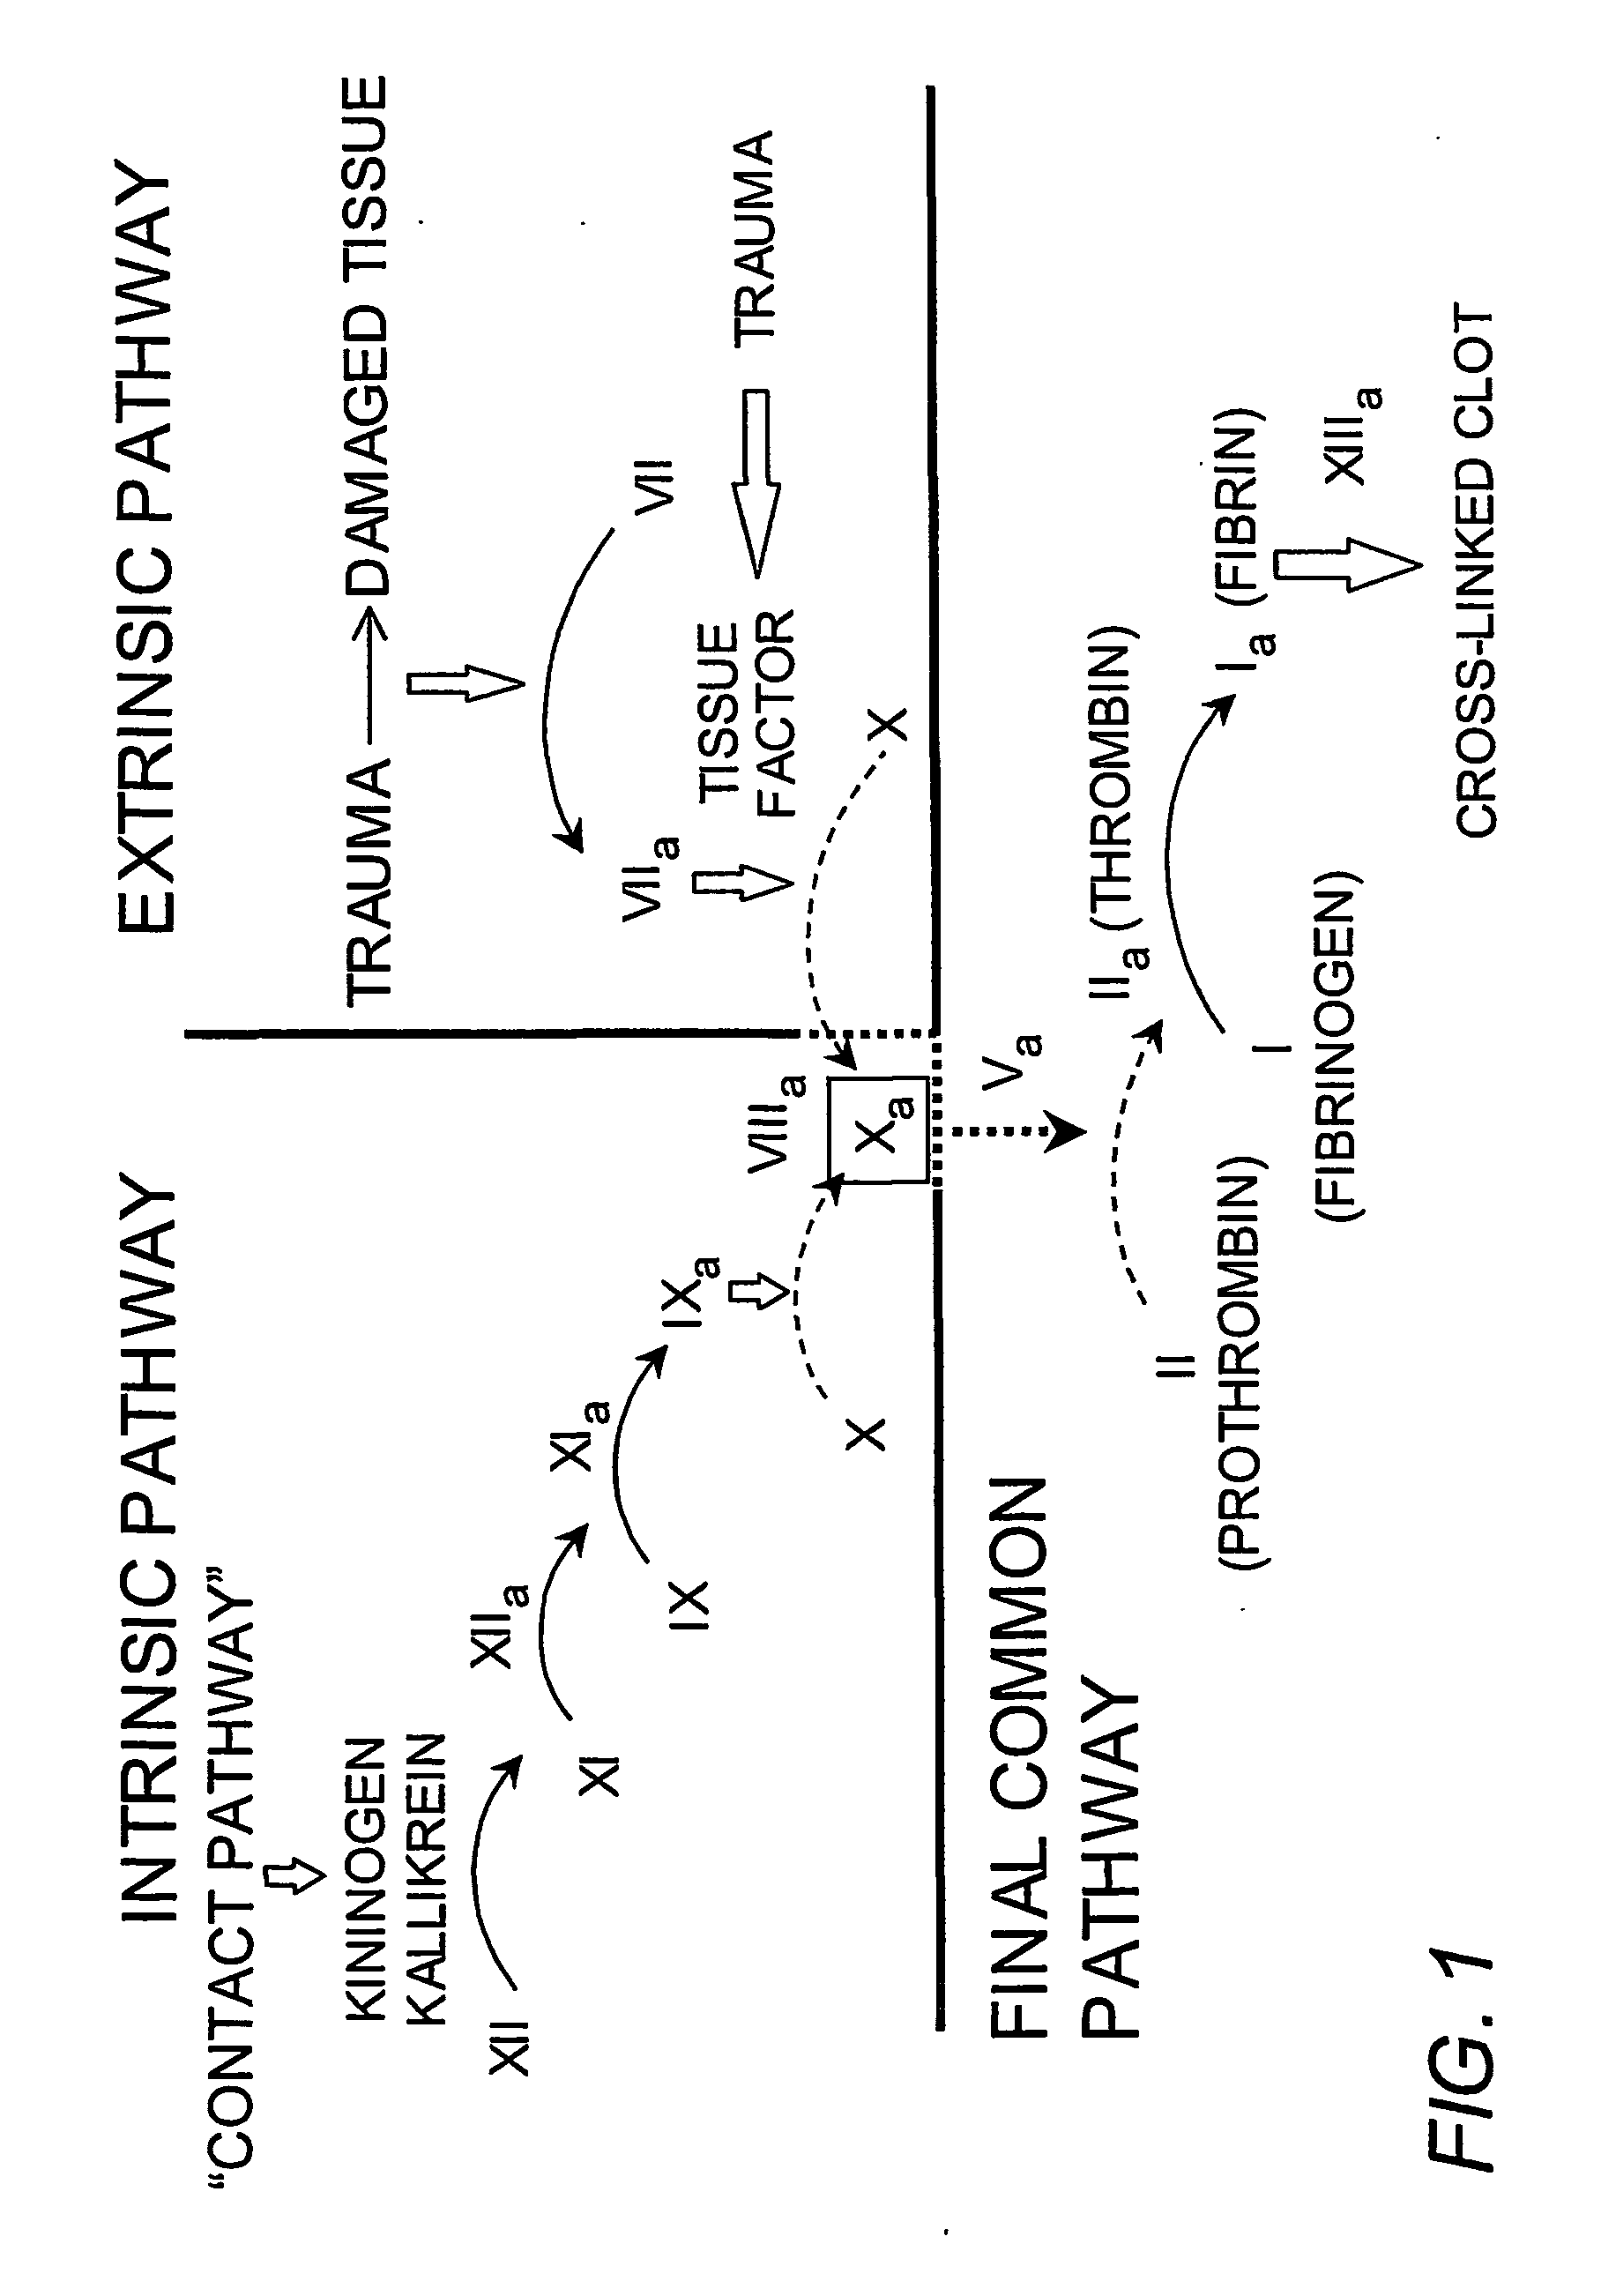 Soluble phospholipids for use in clotting factor assays